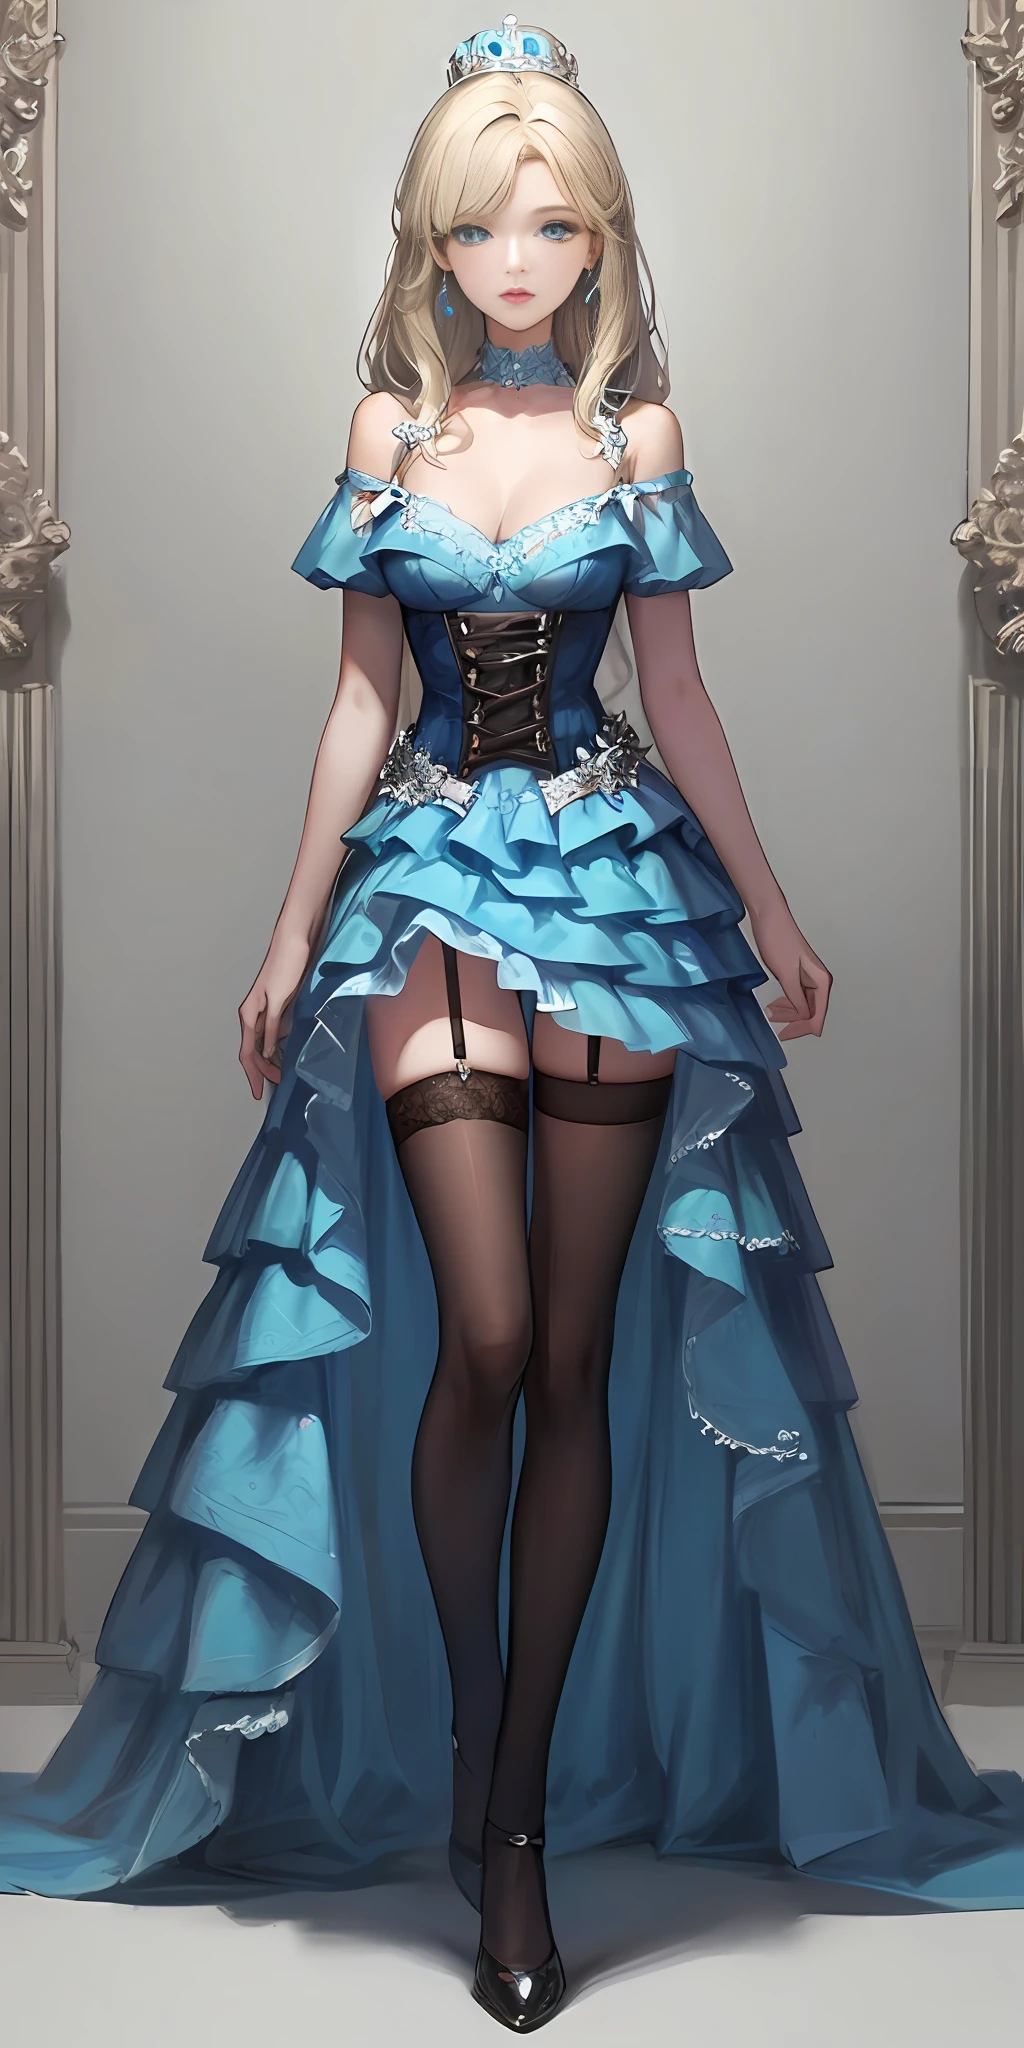 [blue:aqua:0.65] theme, masterpiece, a girl's masterpiece, detailed visual art, blue eyes, light blonde hair, long hair, collarbone, royal princess, elegant, gorgeous quinceanera corset, corset piercing, detailed layered skirt, [detailed frills: 0.1], [frilled dress: 0.1], embroidery, [details princess dress: 0.1], off-the-shoulder, big breasts: 1.3, open crotch, thigh seam, garter belt, groin, [NSFW| uncensored], (simple background: 1.1), low-winged, full-body